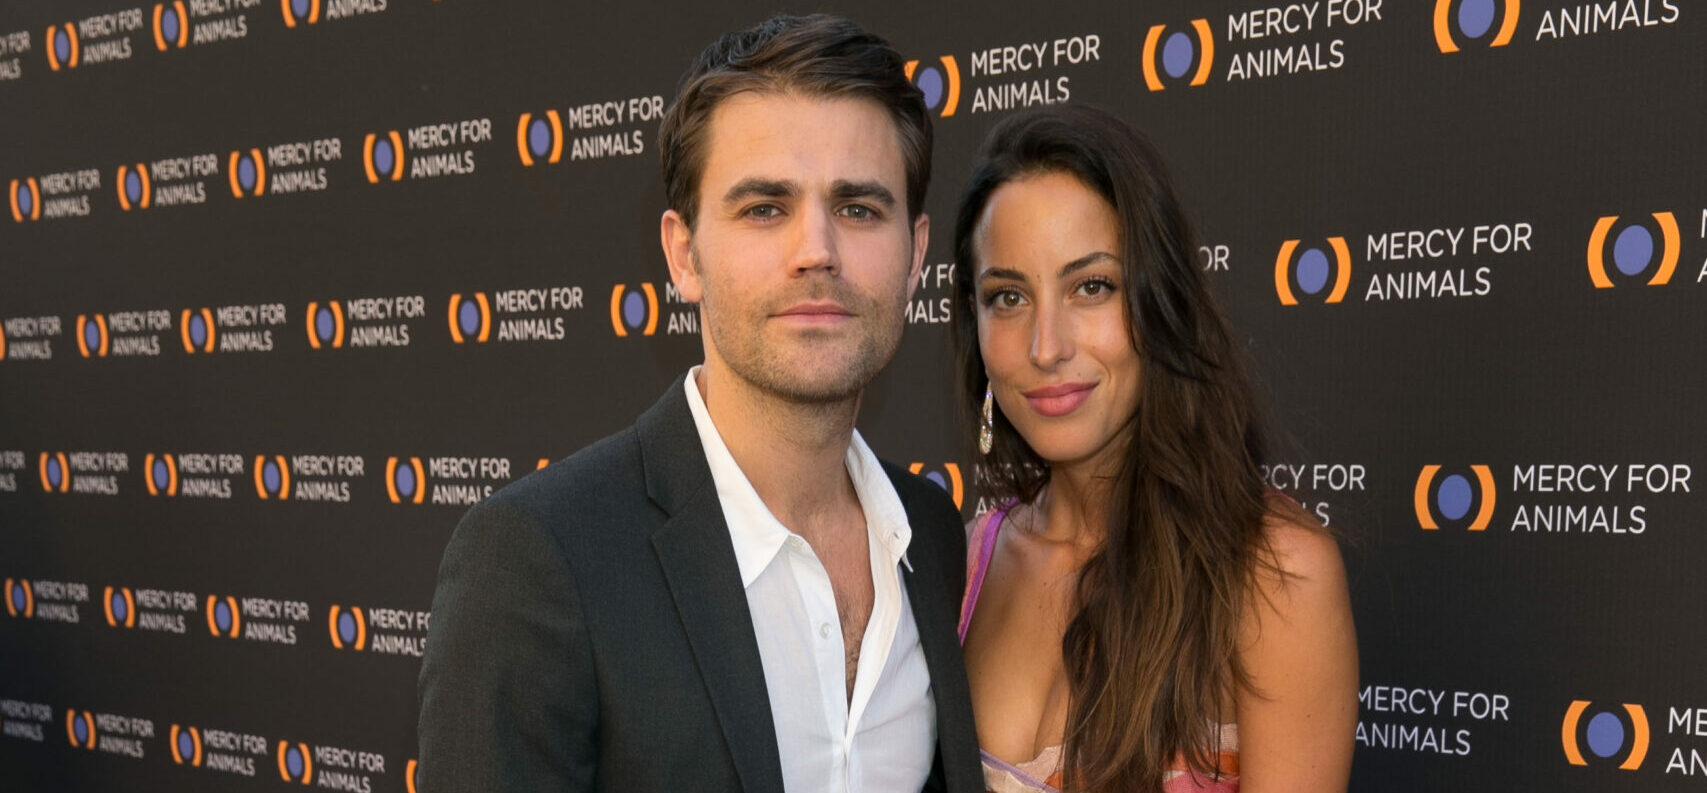 ‘TVD’ Star Paul Wesley Files For Divorce From Brad Pitt’s New GF